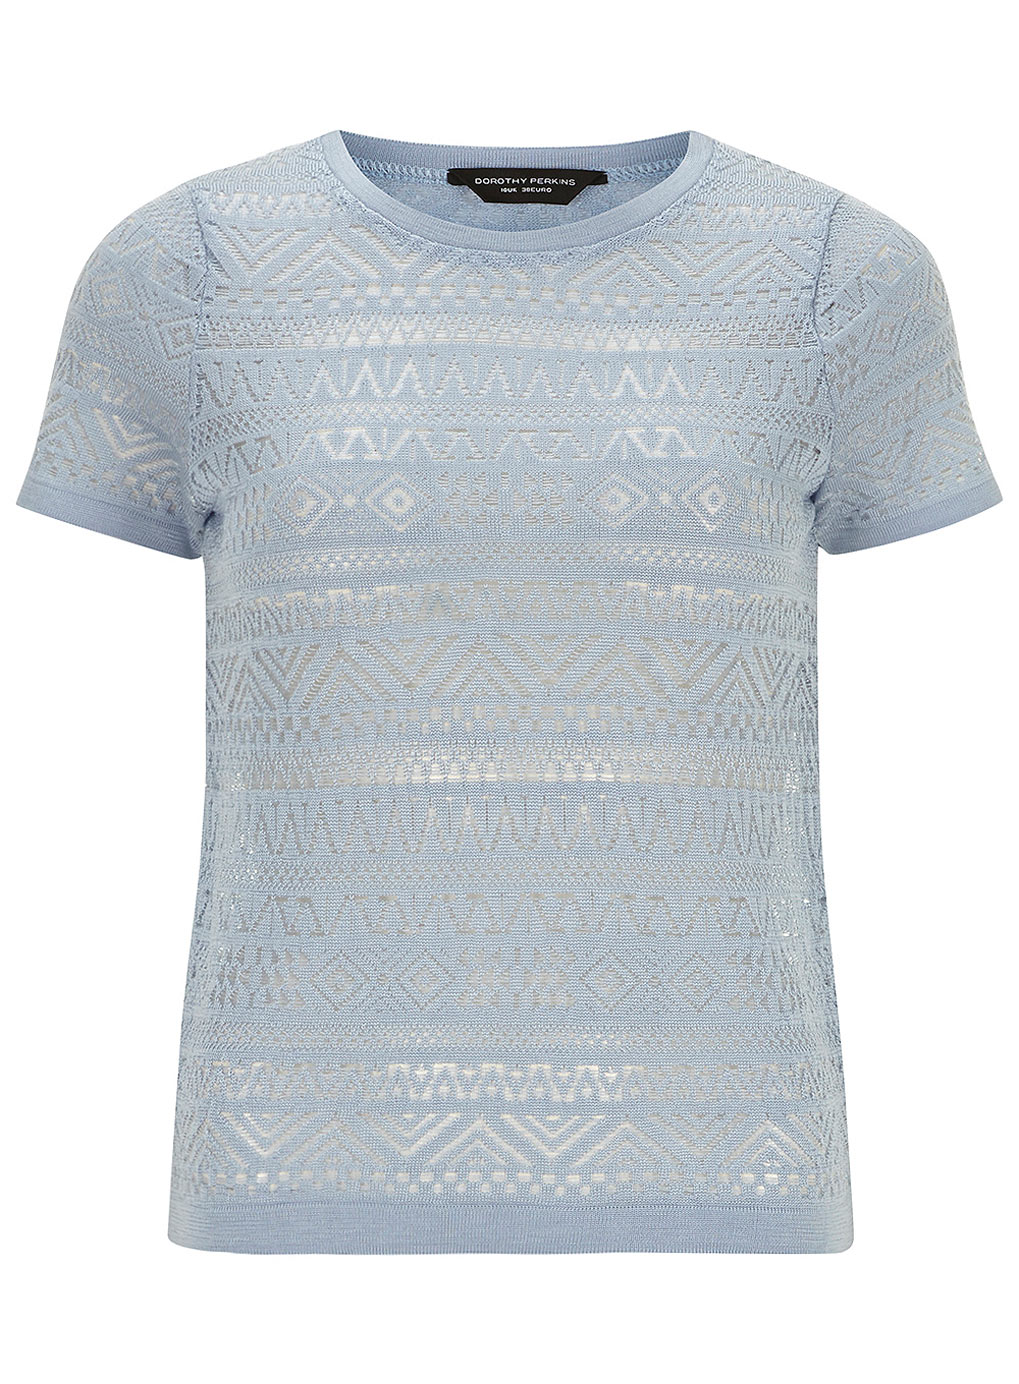 Blue lace knitted t-shirt 55148619